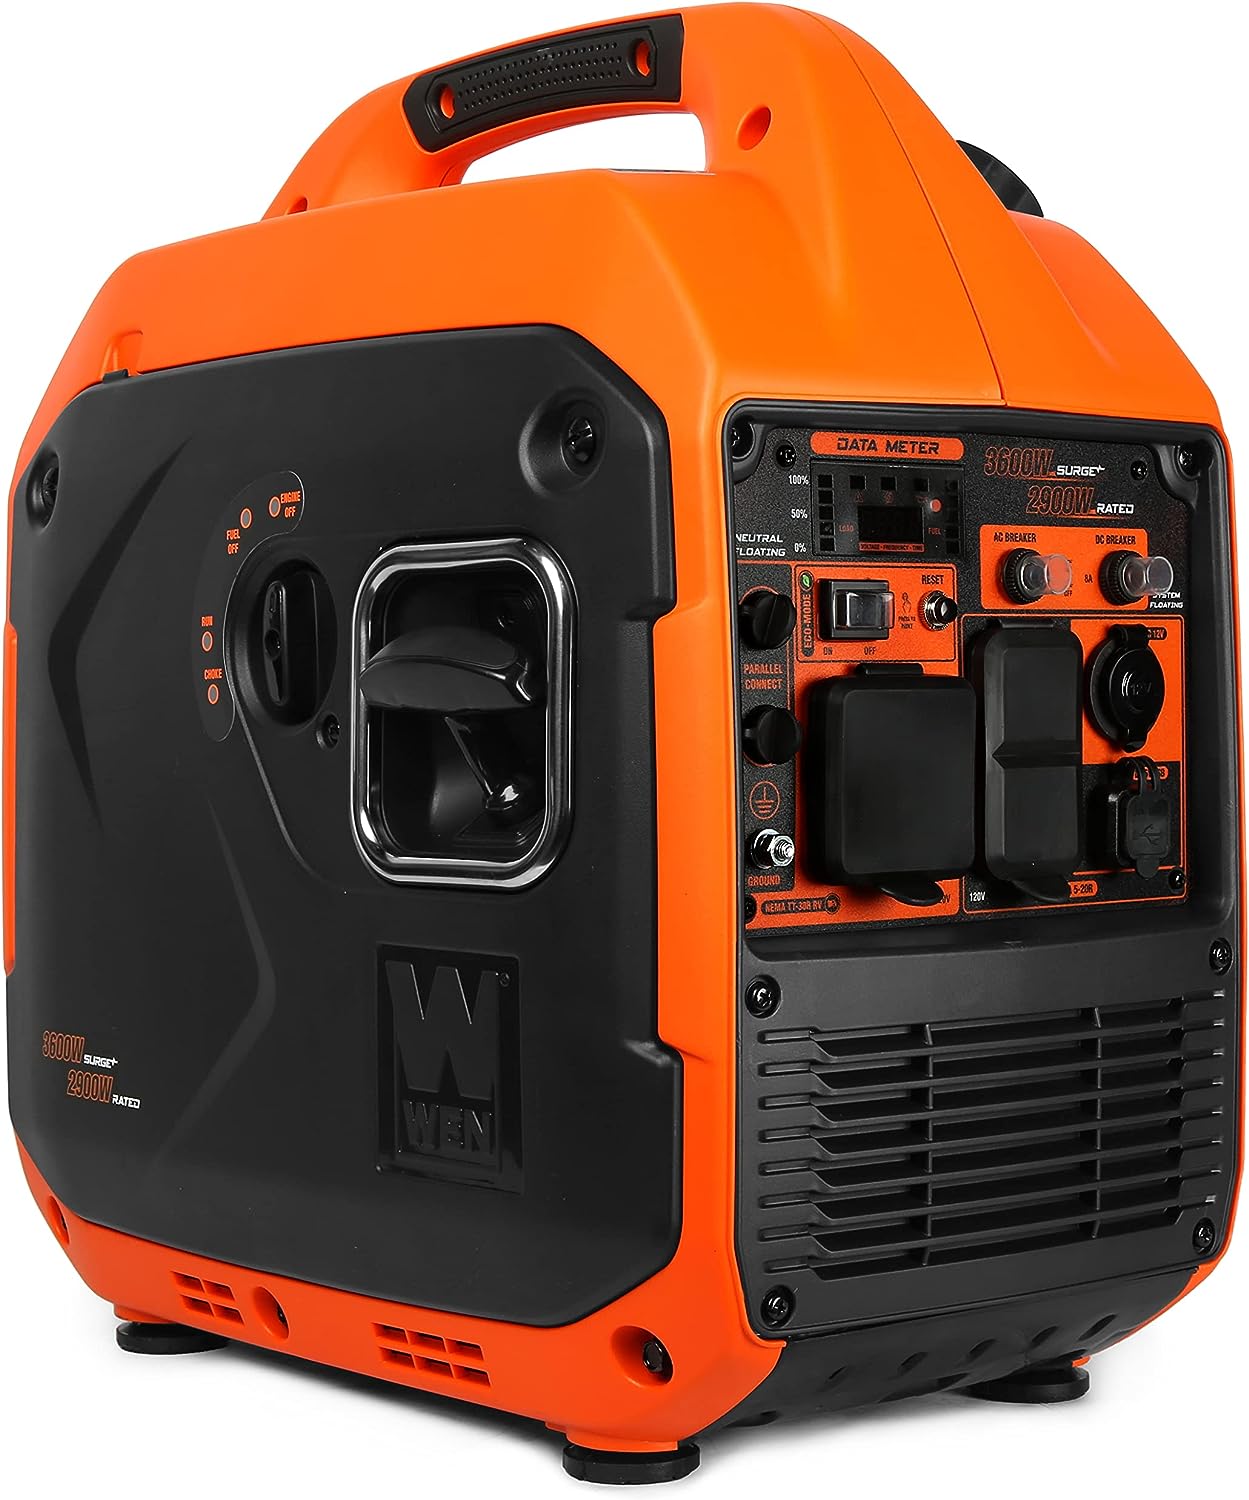 Power Up with Peace of Mind: WEN 3600-Watt Portable Inverter Generator Review – Your Quiet, Efficient Energy Solution